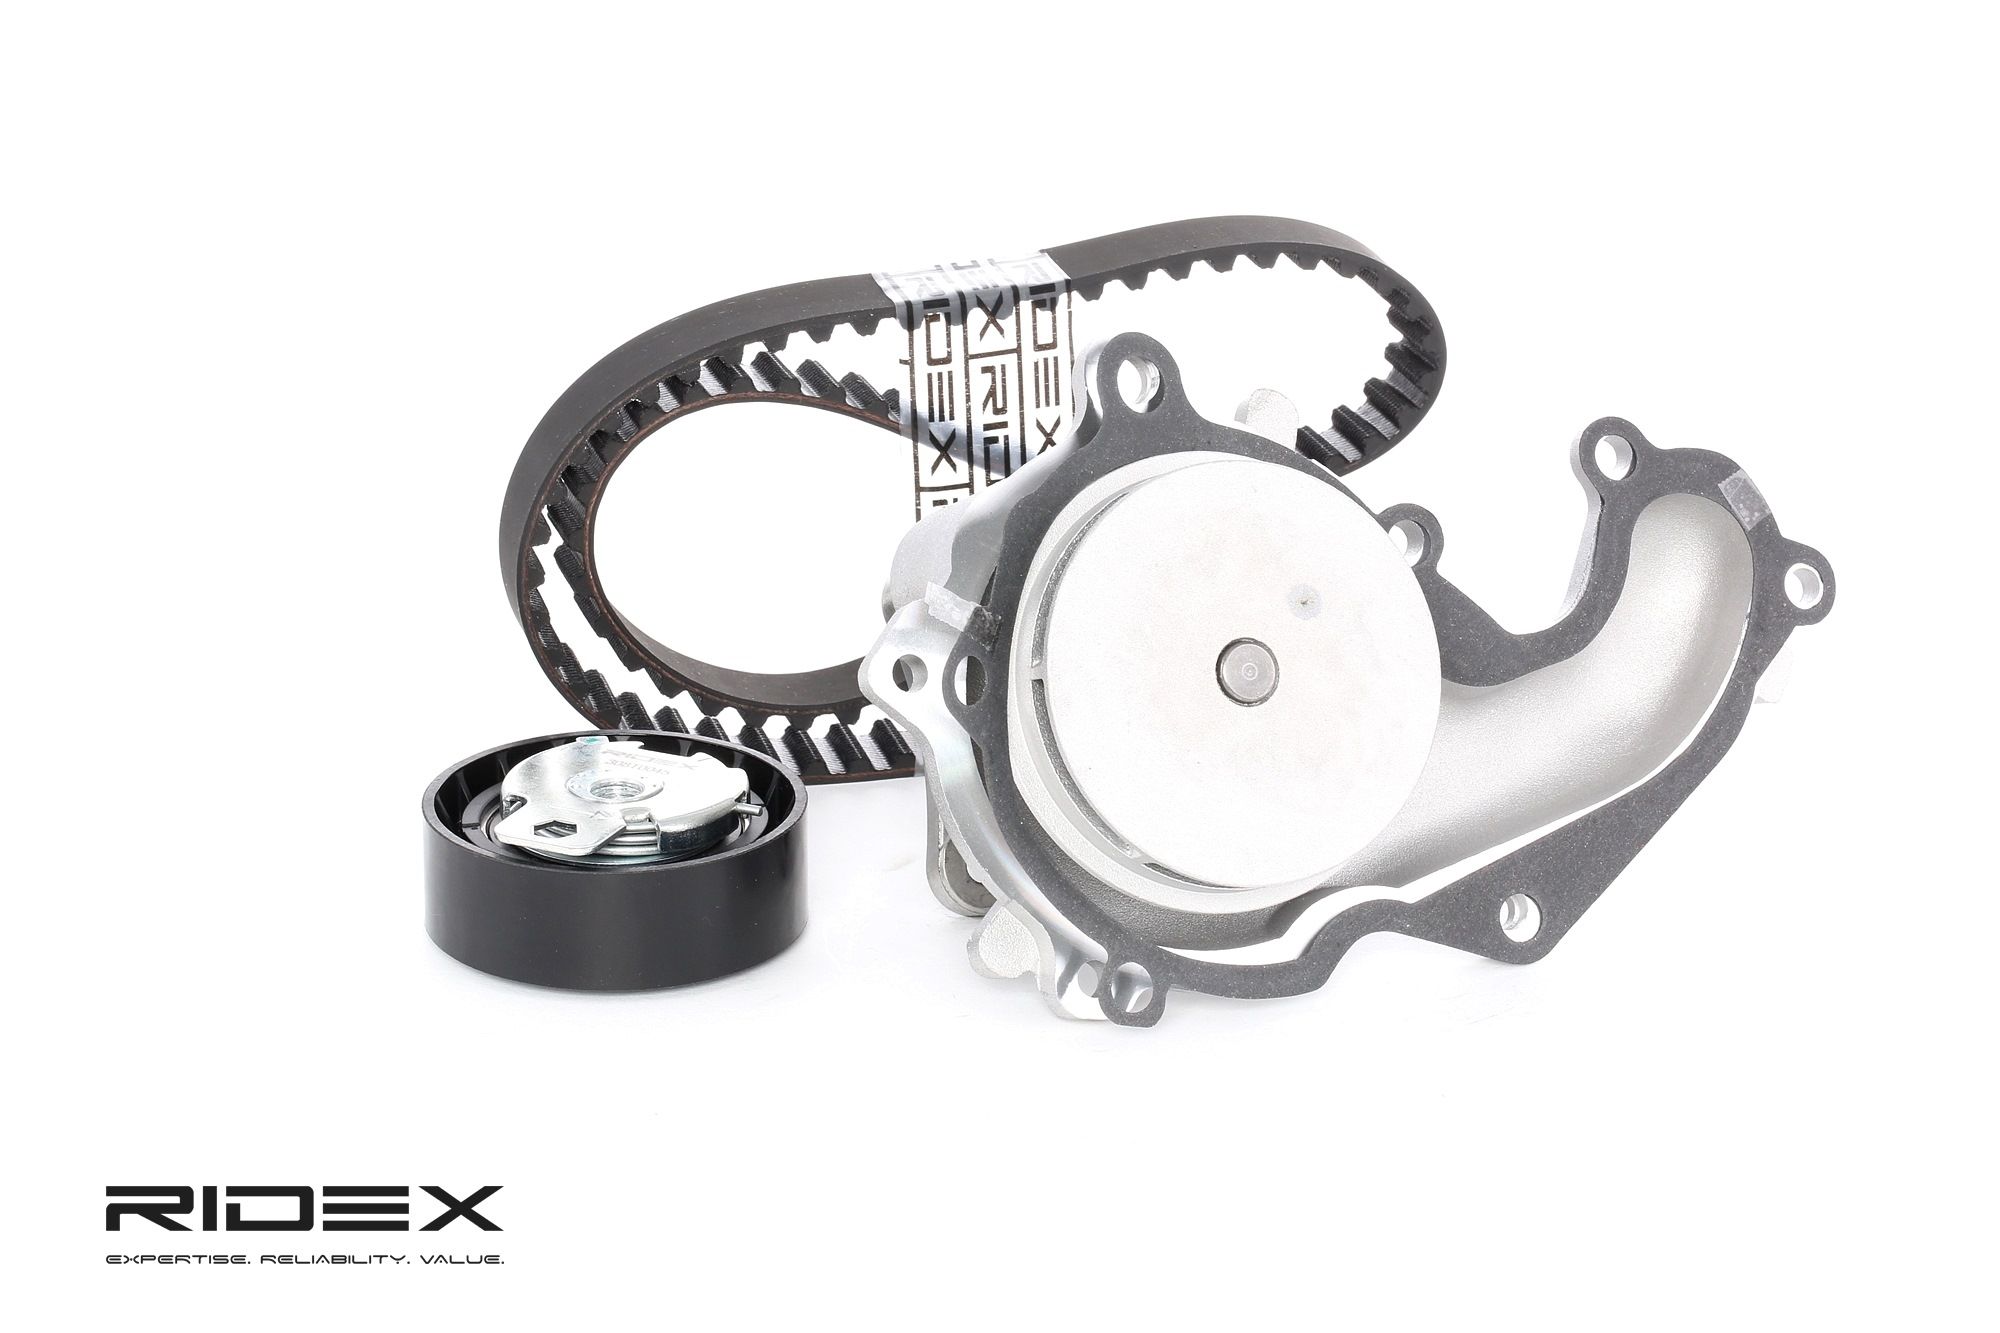 RIDEX 3096W0050 Water pump and timing belt kit Number of Teeth: 91, Width 1: 20 mm, for v-ribbed belt use, with rounded tooth profile, Plastic